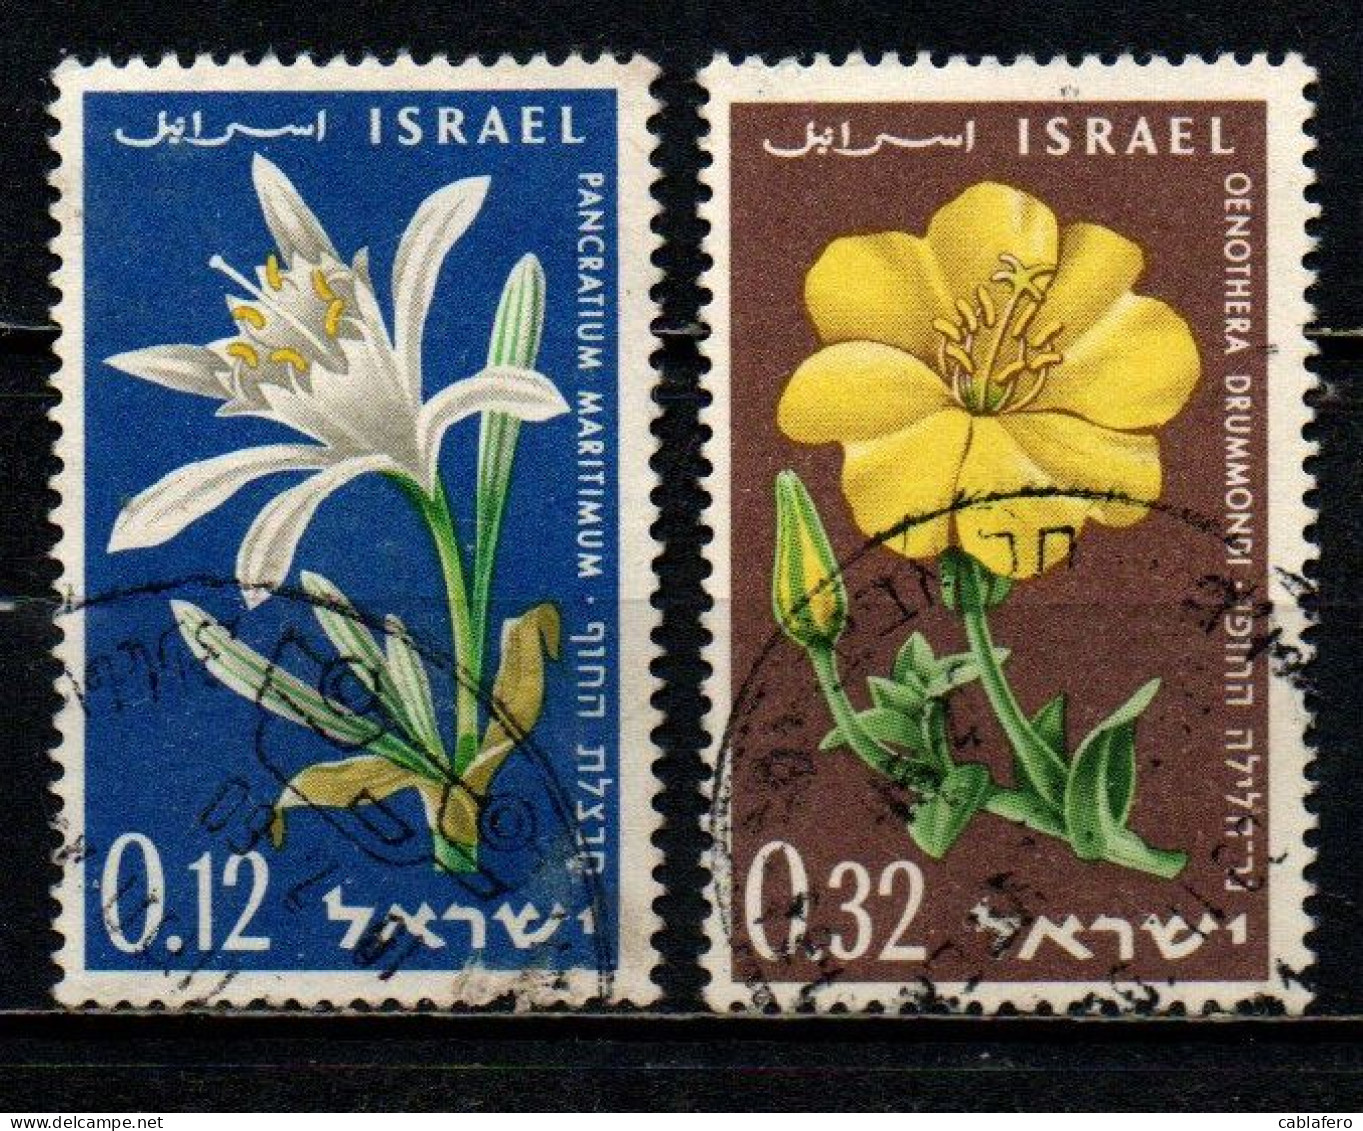 ISRAELE - 1960 - Sand Lily And Evening Primrose - Memorial Day; Proclamation Of State Of Israel, 12th Anniv - USATI - Usados (sin Tab)